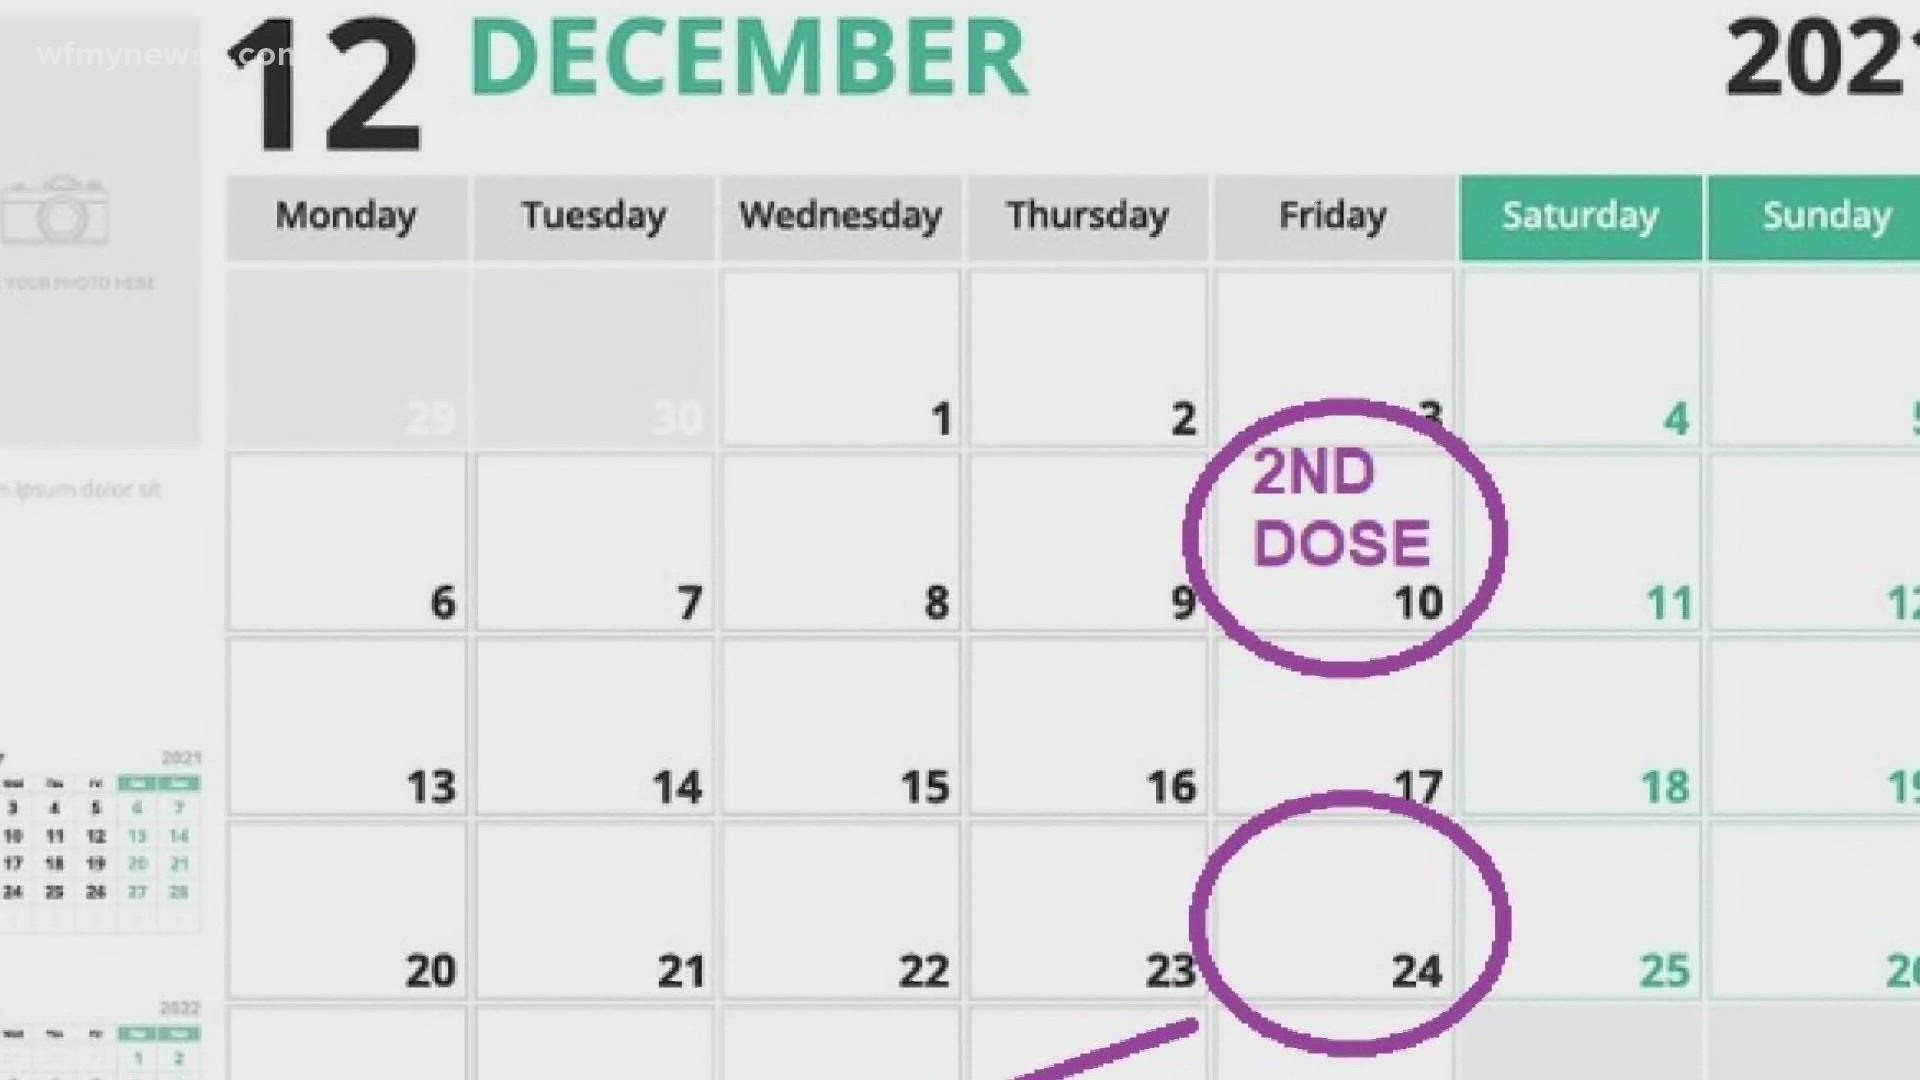 5-11-year-old vaccine appointments must be made by Nov. 19 to be fully protected by Christmas Eve.